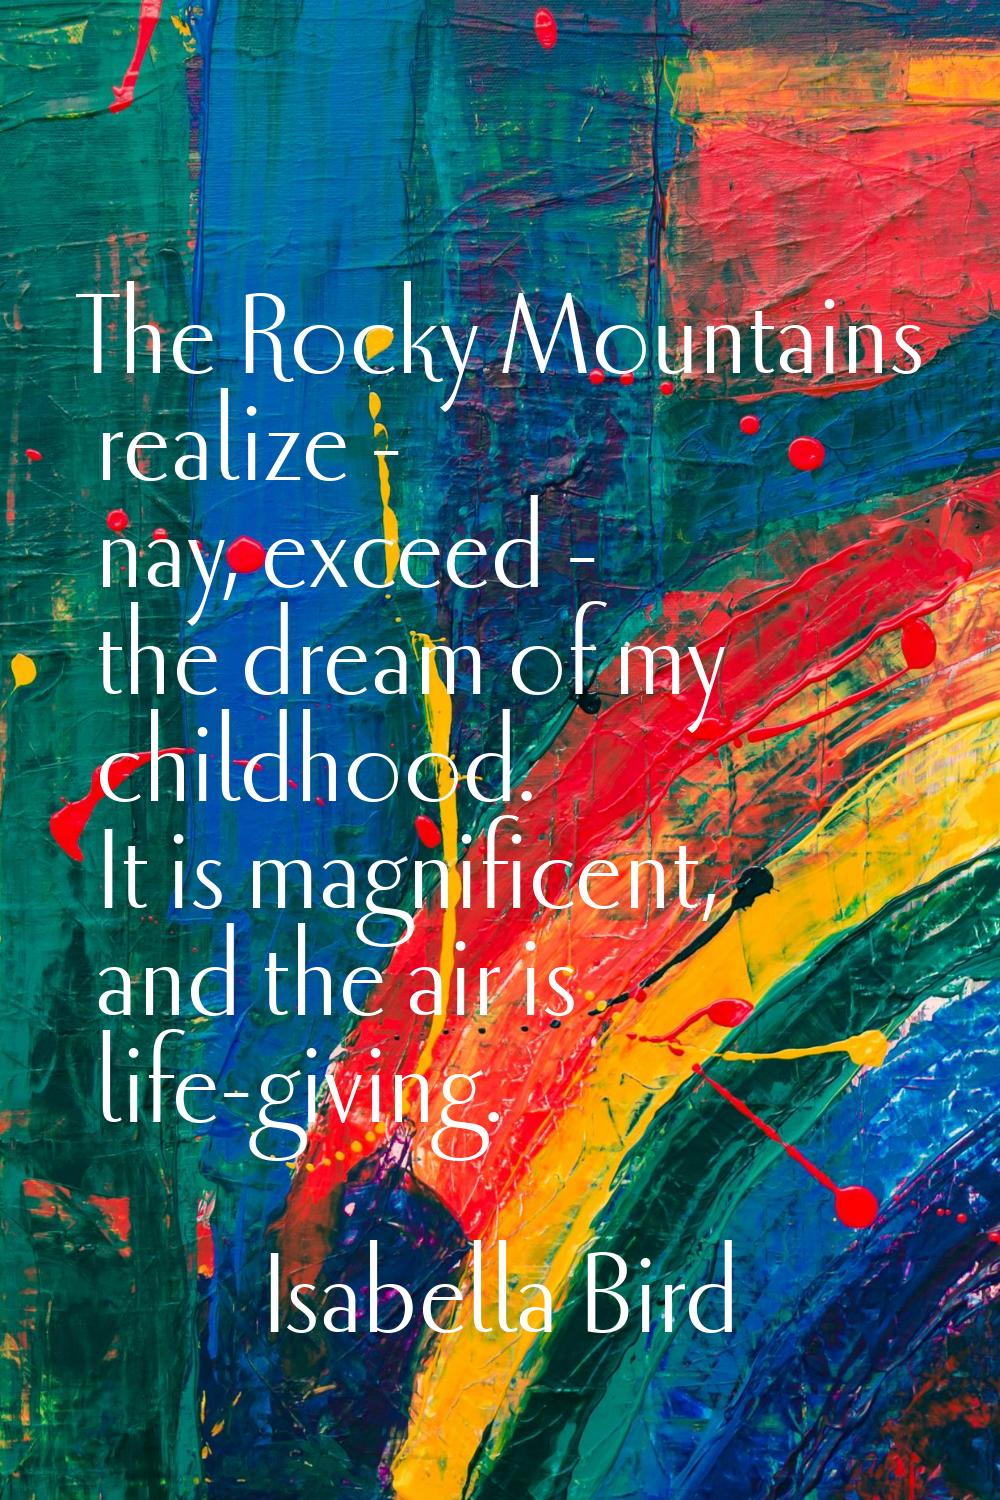 The Rocky Mountains realize - nay, exceed - the dream of my childhood. It is magnificent, and the a